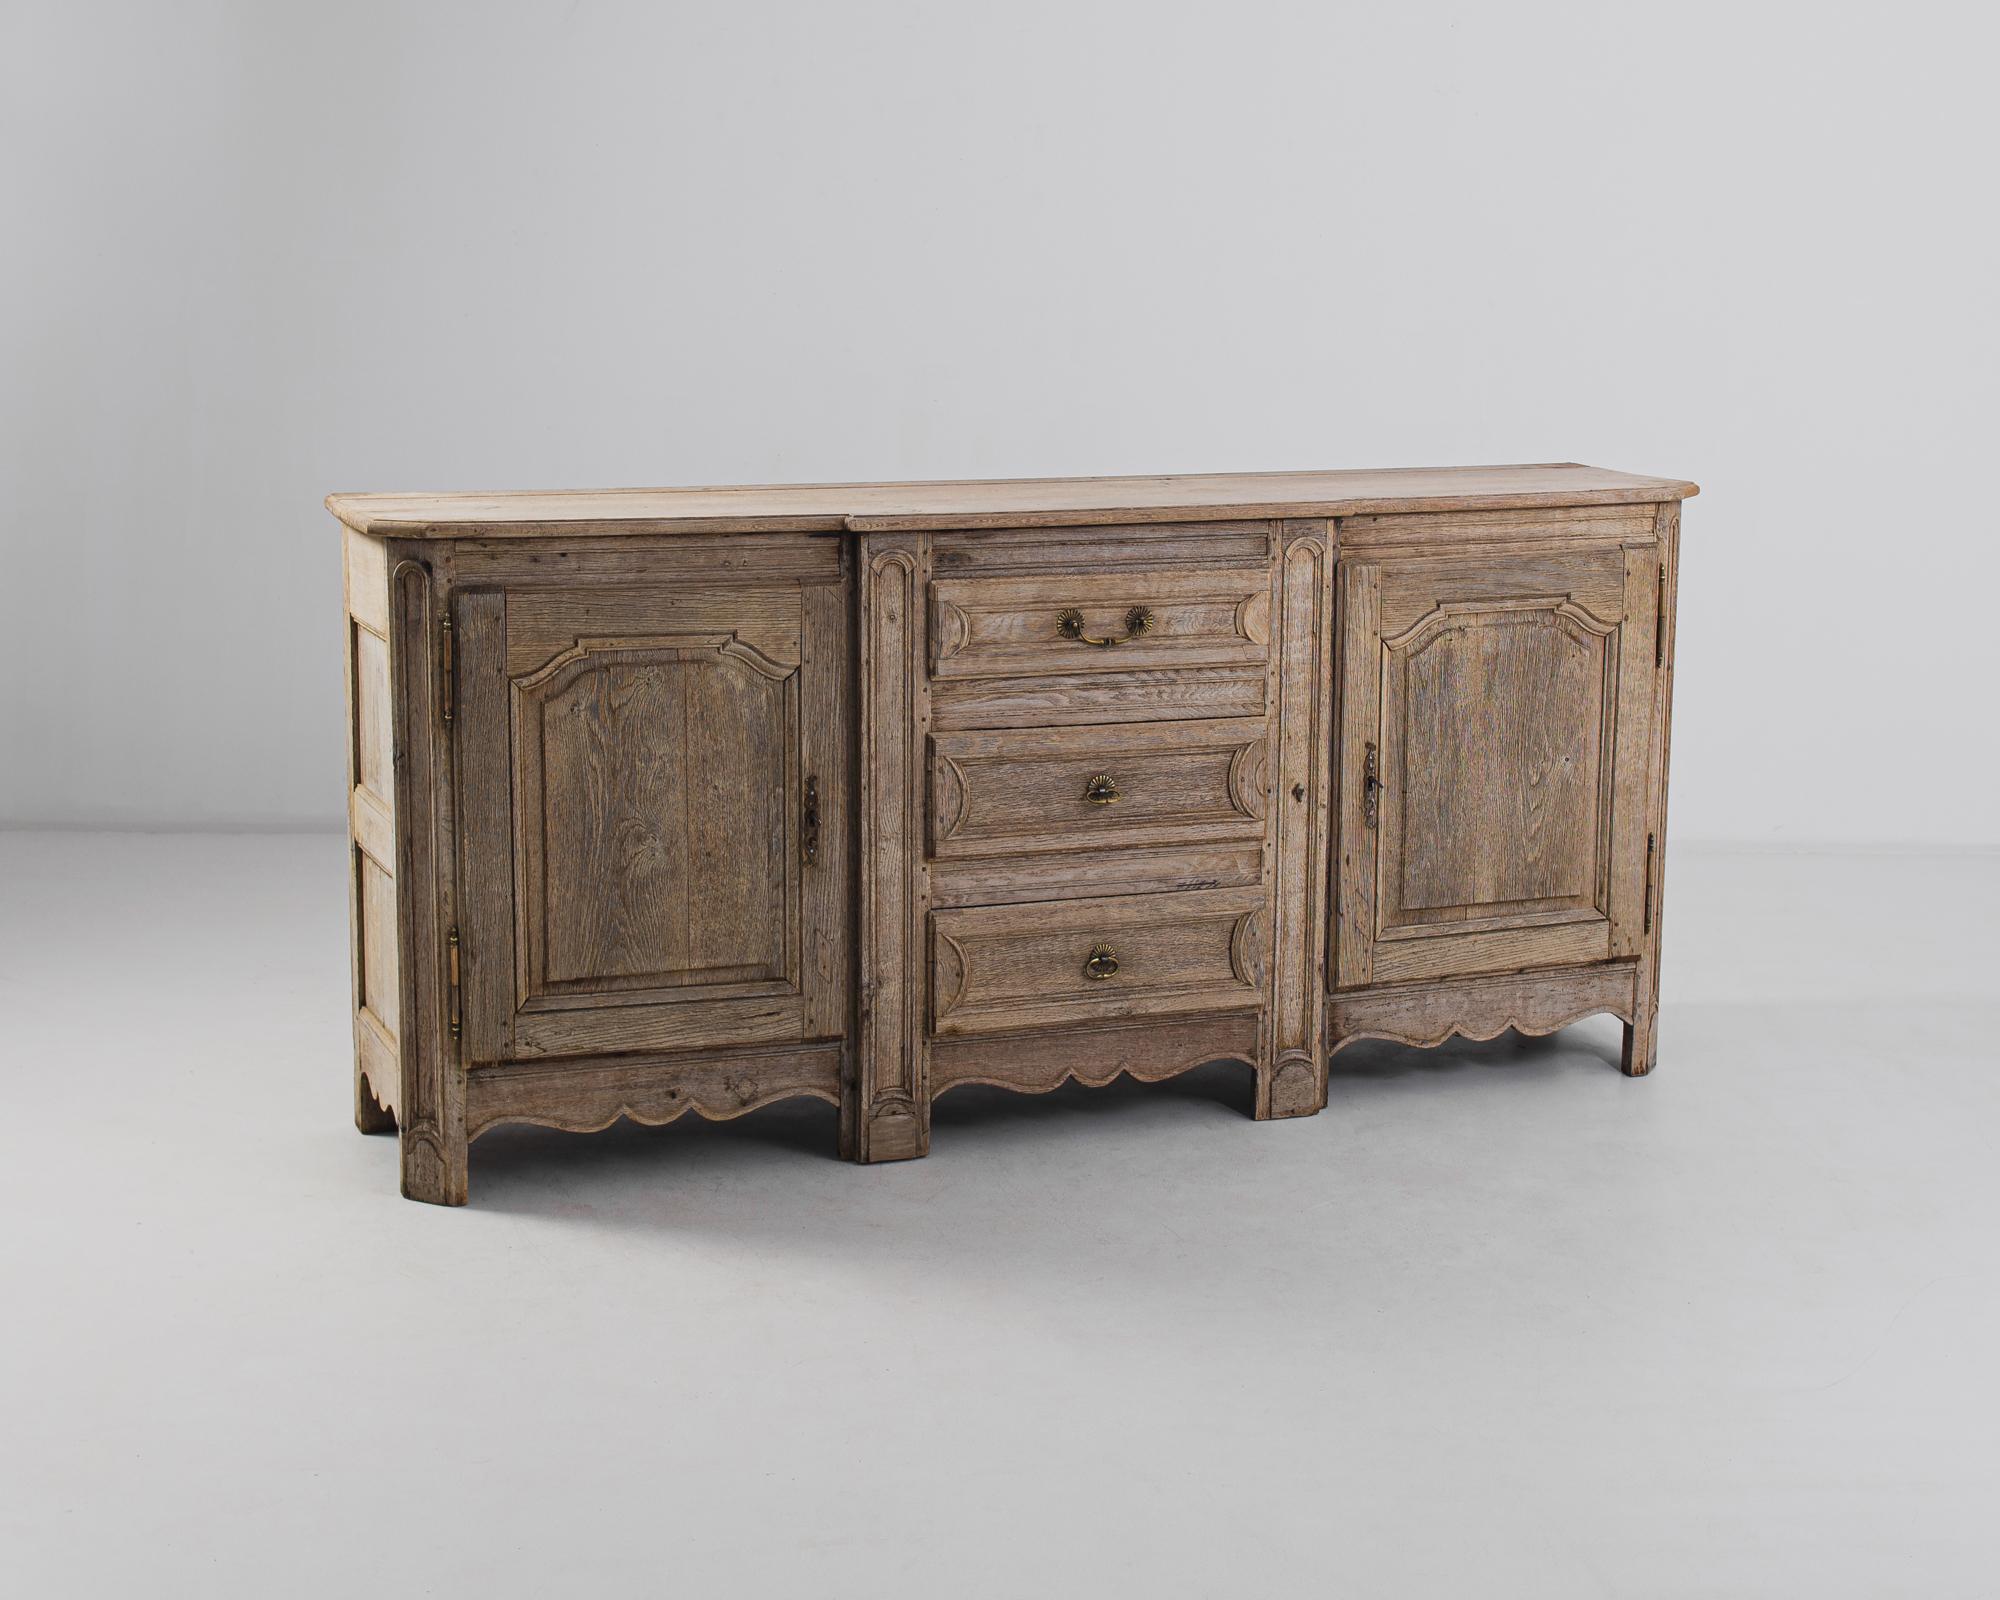 An oak buffet from 1880s France. The long, rectangular cabinet is enlivened by the contours of the paneling of the cupboards and drawers, and a scalloped apron. The wood has been restored in our workshops to an organic finish, revealing the natural